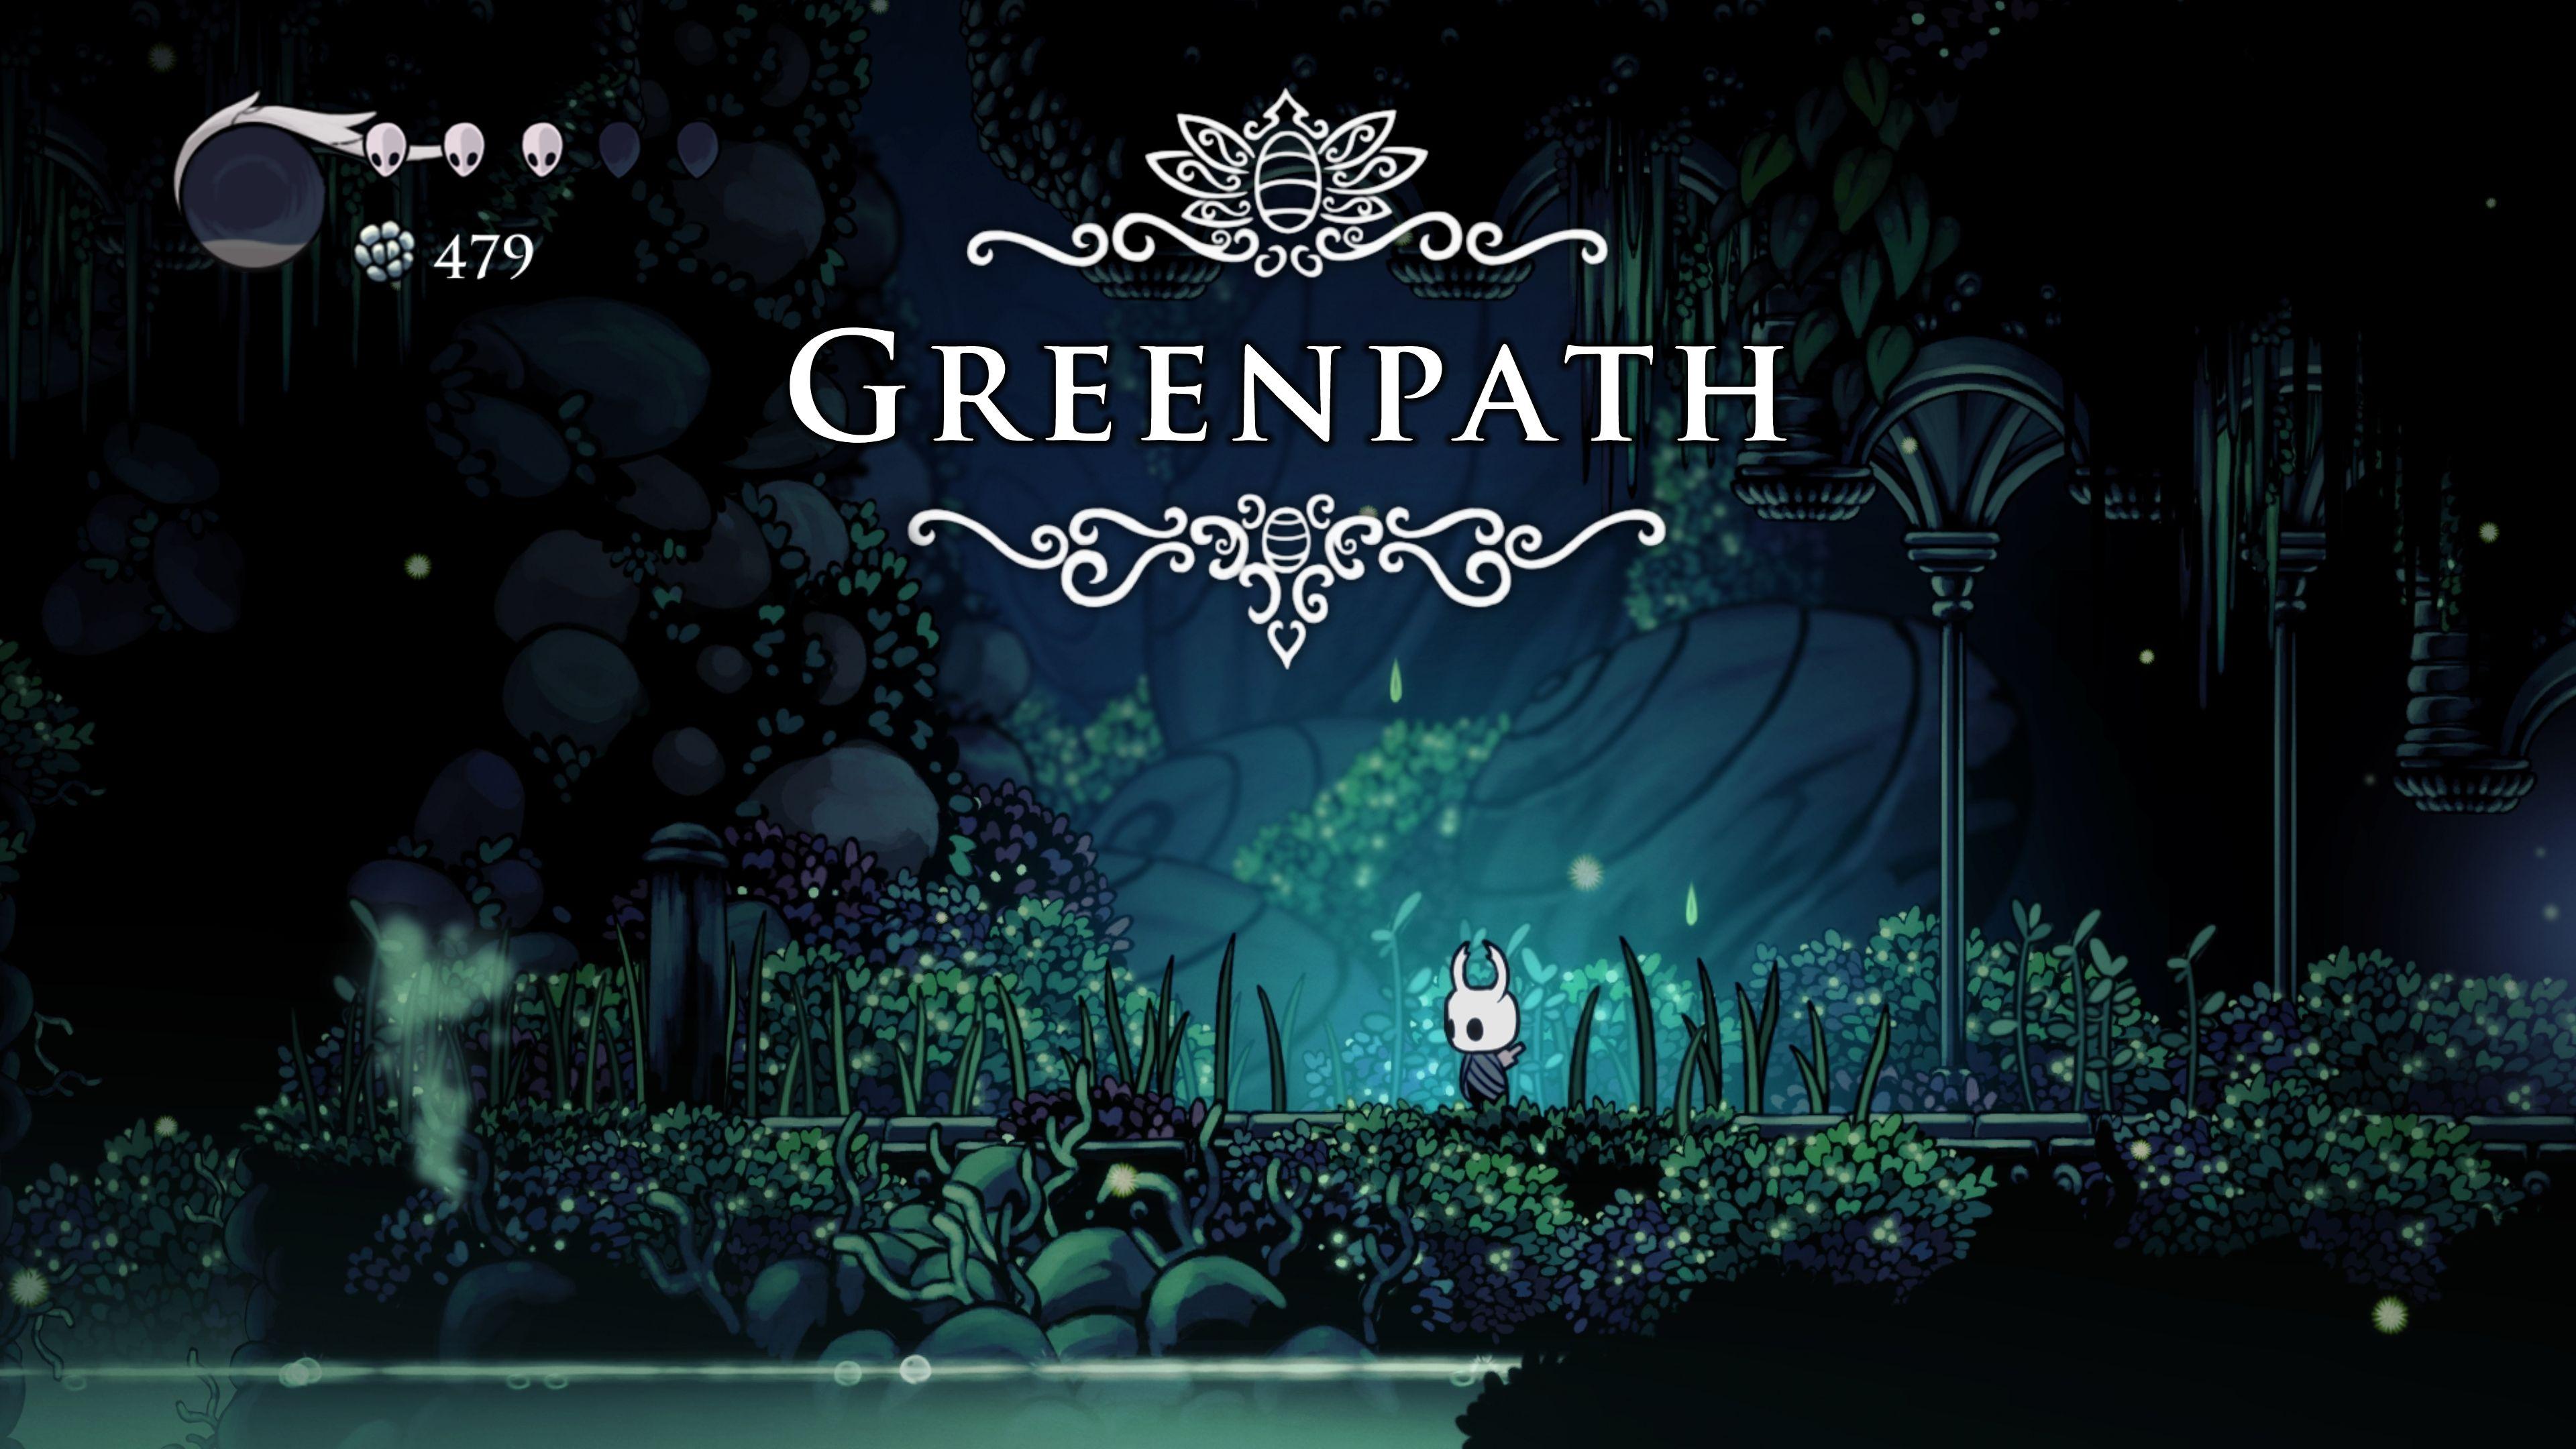 hollow knight download full